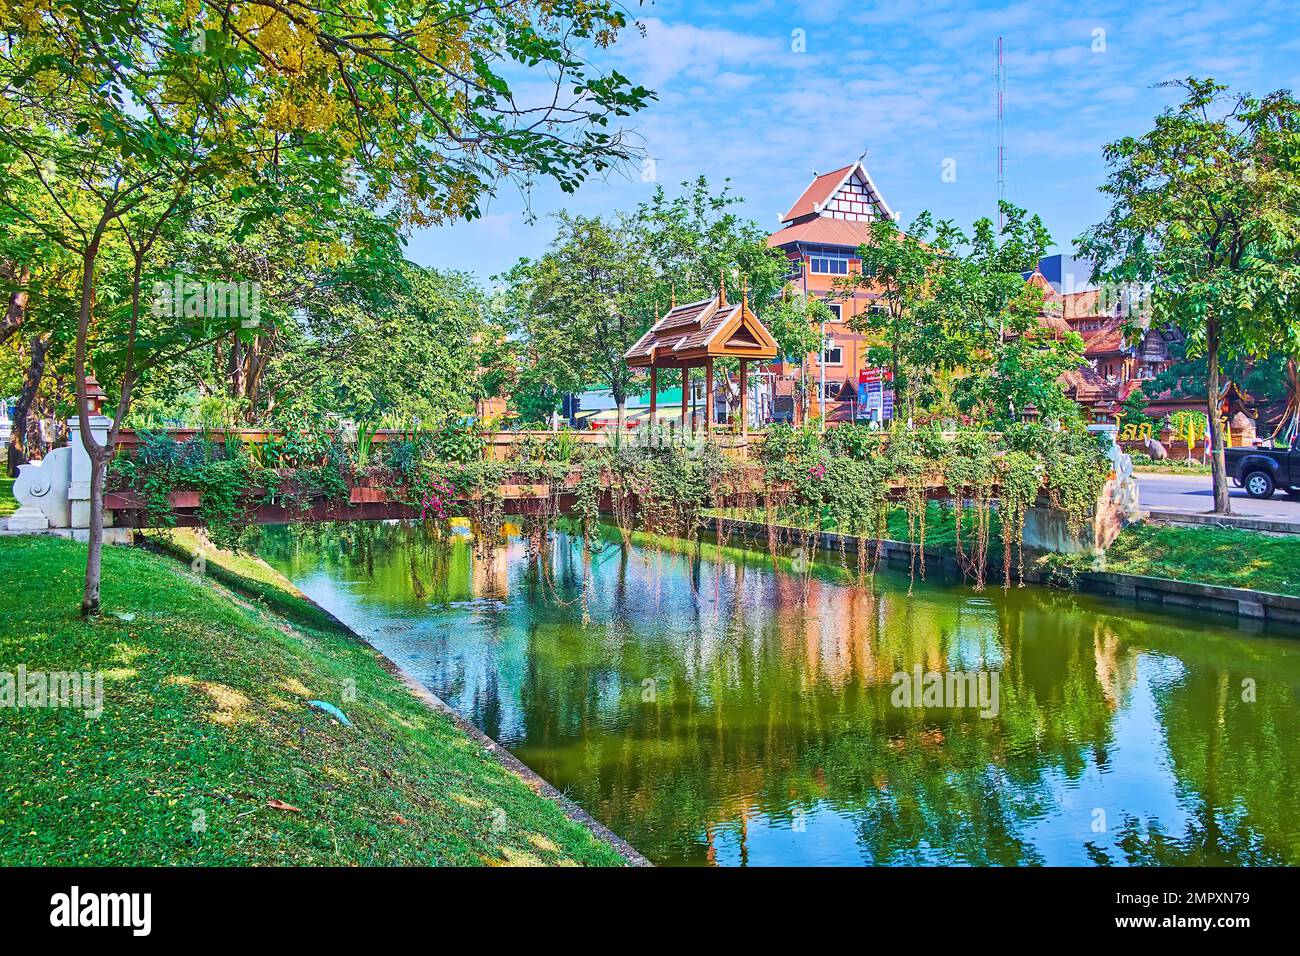 The scenic wooden footbridge across the Old City Moat, decorated with carved gate, hanging green plants and orchids, Chiang Mai, Thailand Stock Photo